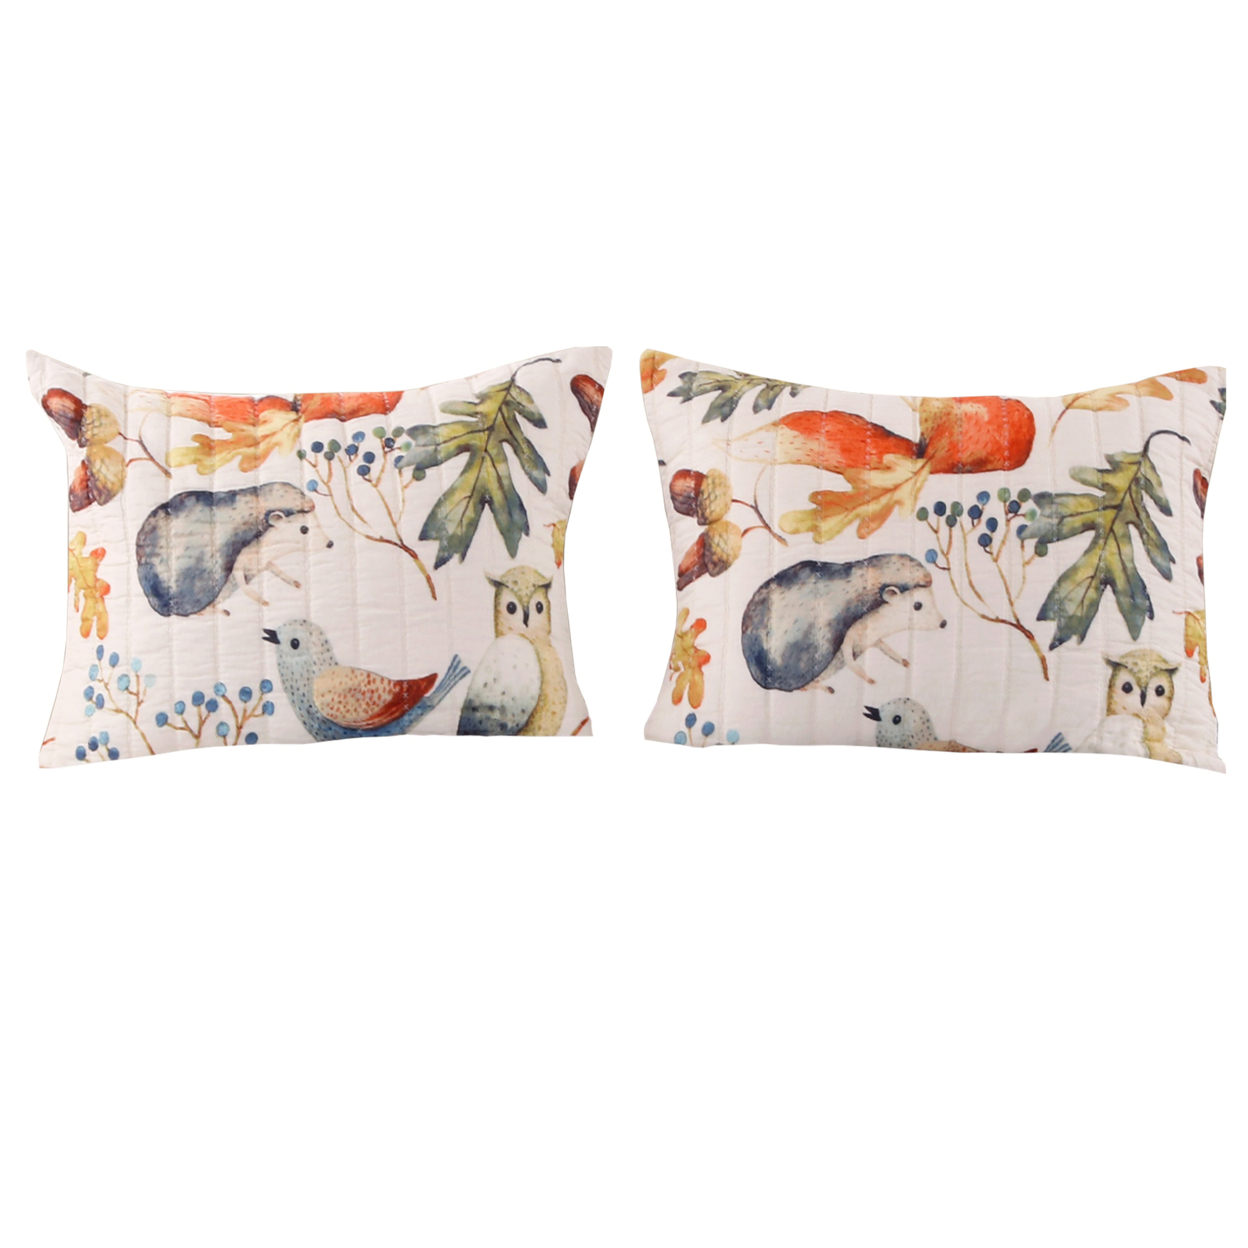 26 X 20 Inches Standard Pillow Sham With Fox And Owl Print, Multicolor- Saltoro Sherpi